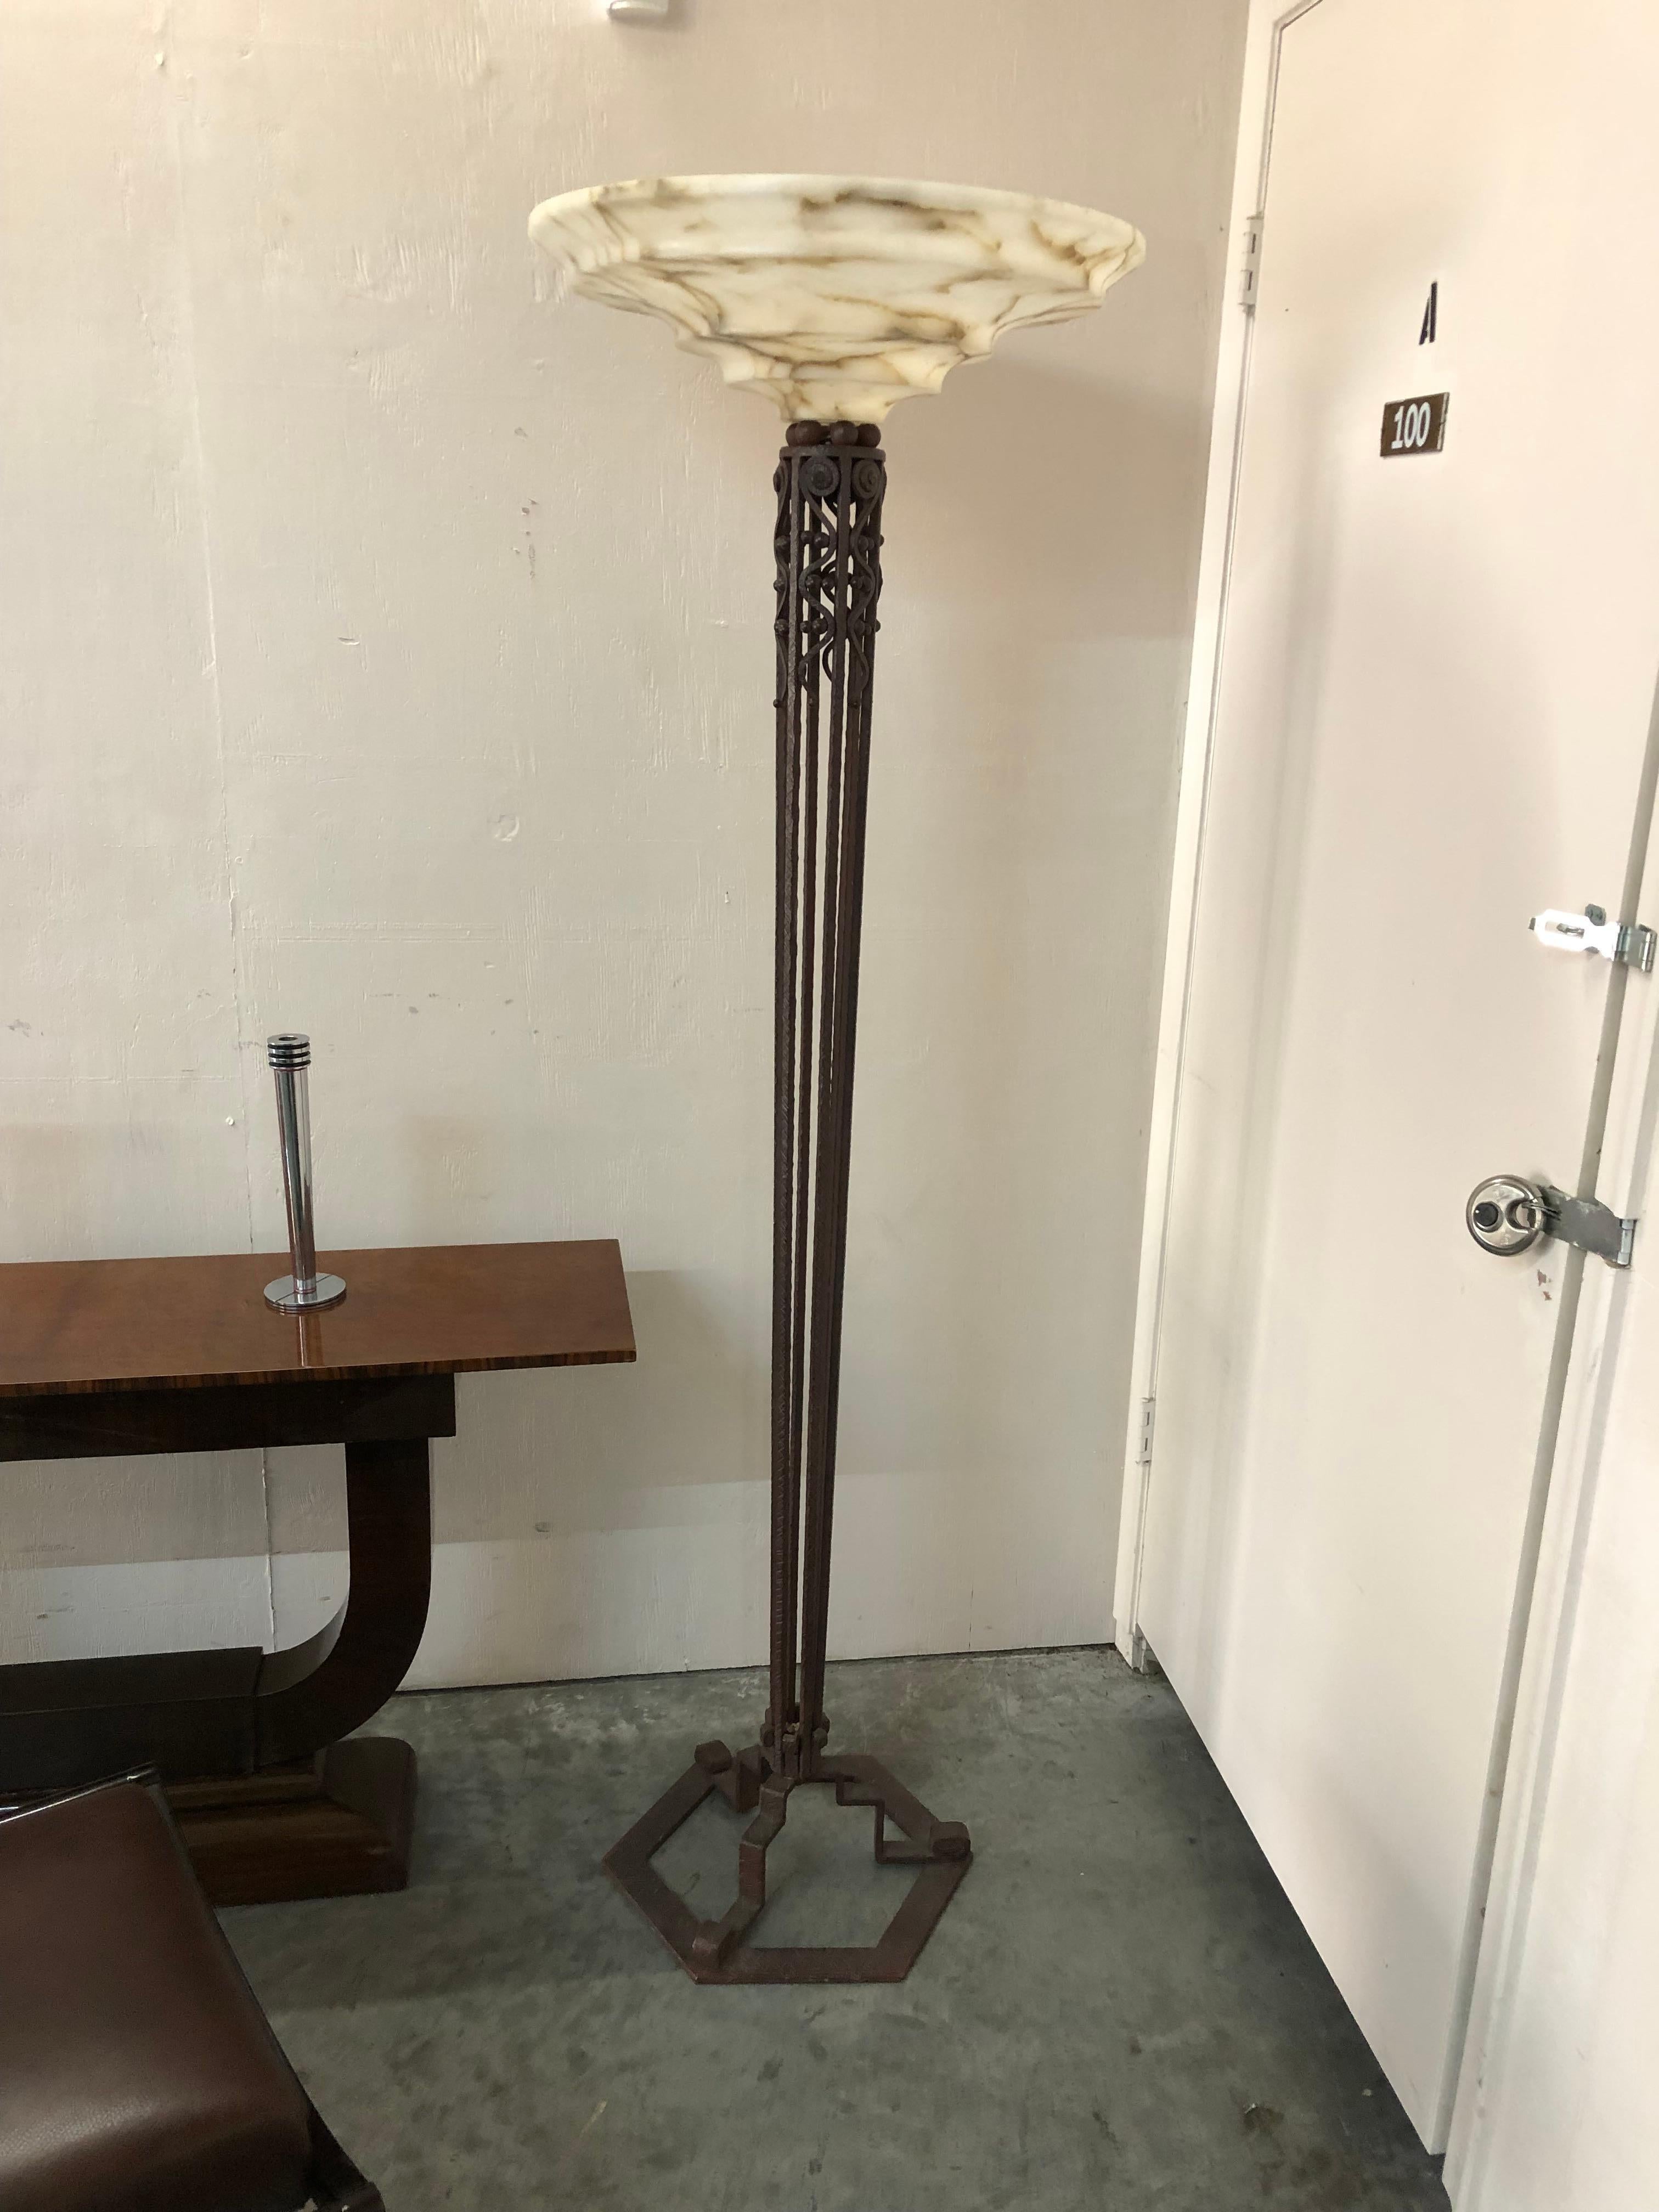 Floor lamps Jugendstil, Art Nouveau, Liberty
Materials: iron and Alabaster
We have specialized in the sale of Art Deco and Art Nouveau styles since 1982
Pushing the button that reads 'View All From Seller'. And you can see more objects to the style